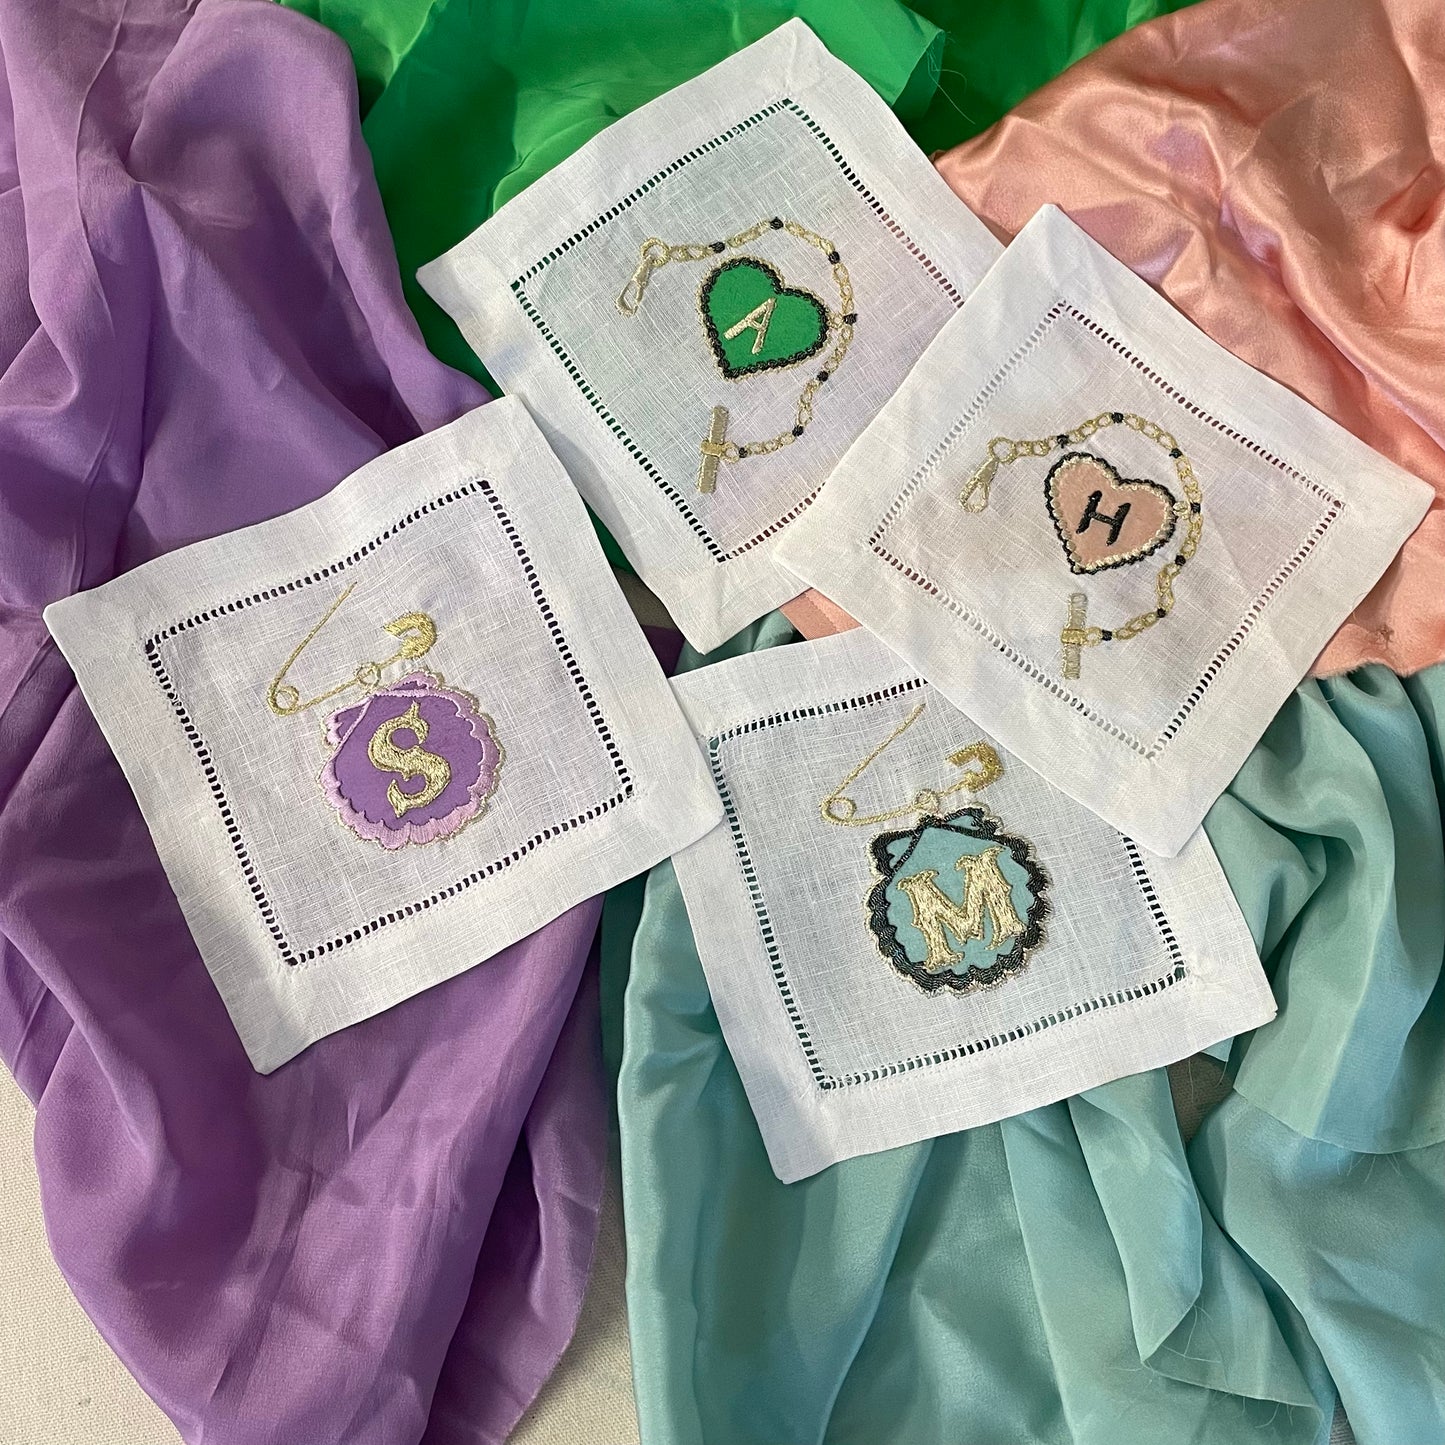 Four embroidered artworks from the Love Token collection including the custom charm bracelet and the safety pin & shell artwork